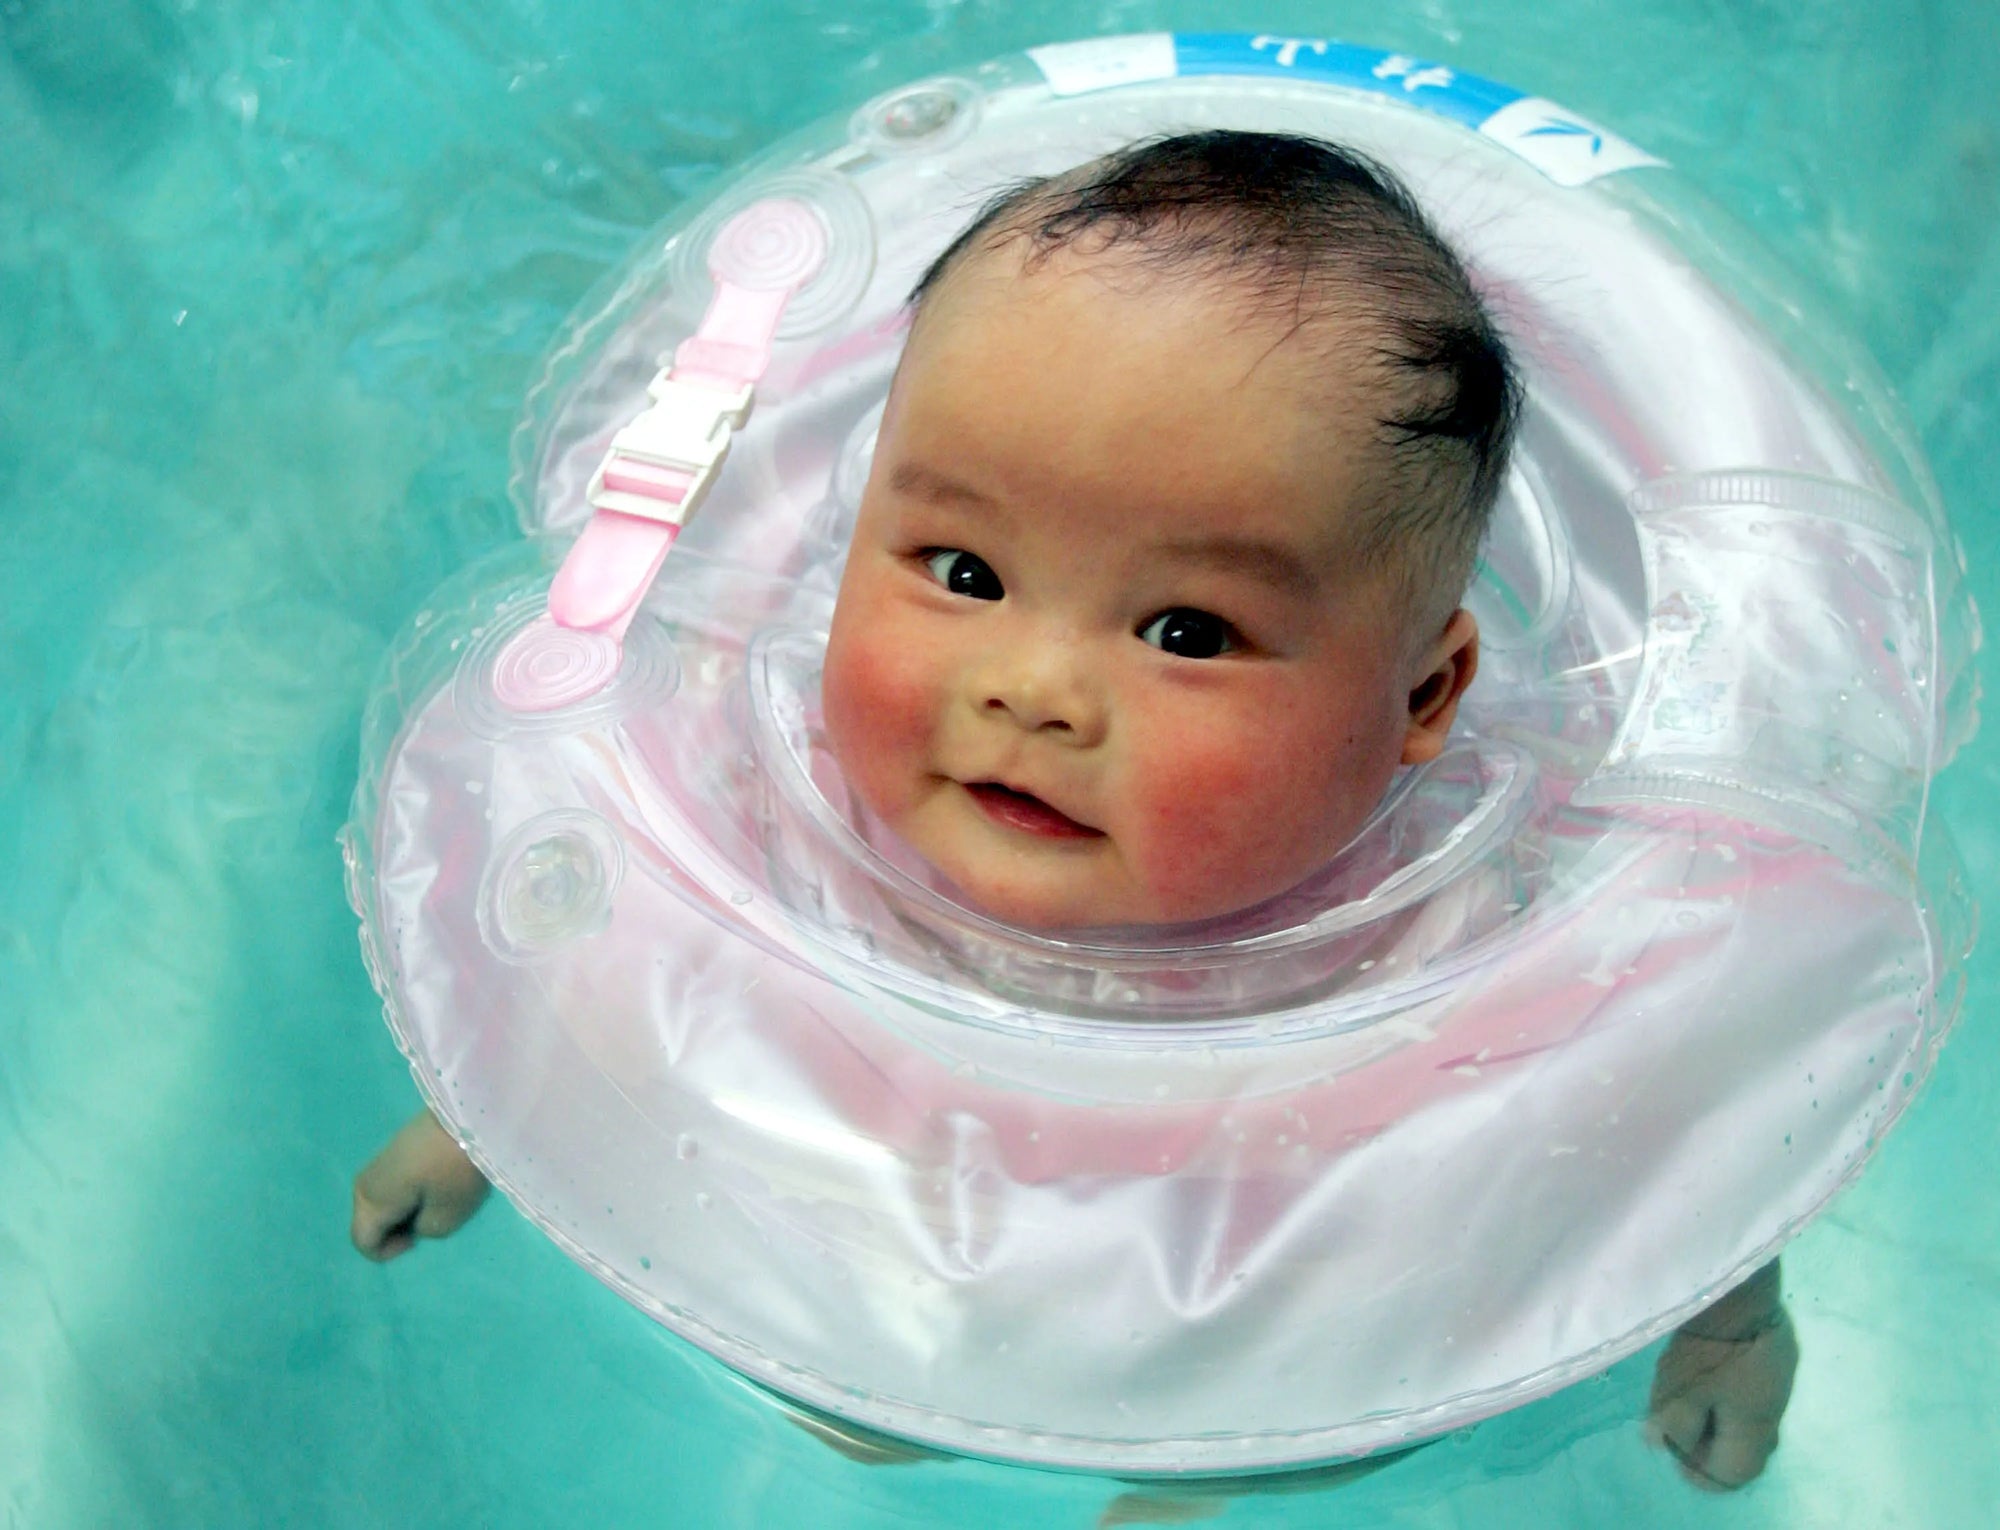 Inflatable Baby Neck Floats Risks and Should You Use If You Have Better Options